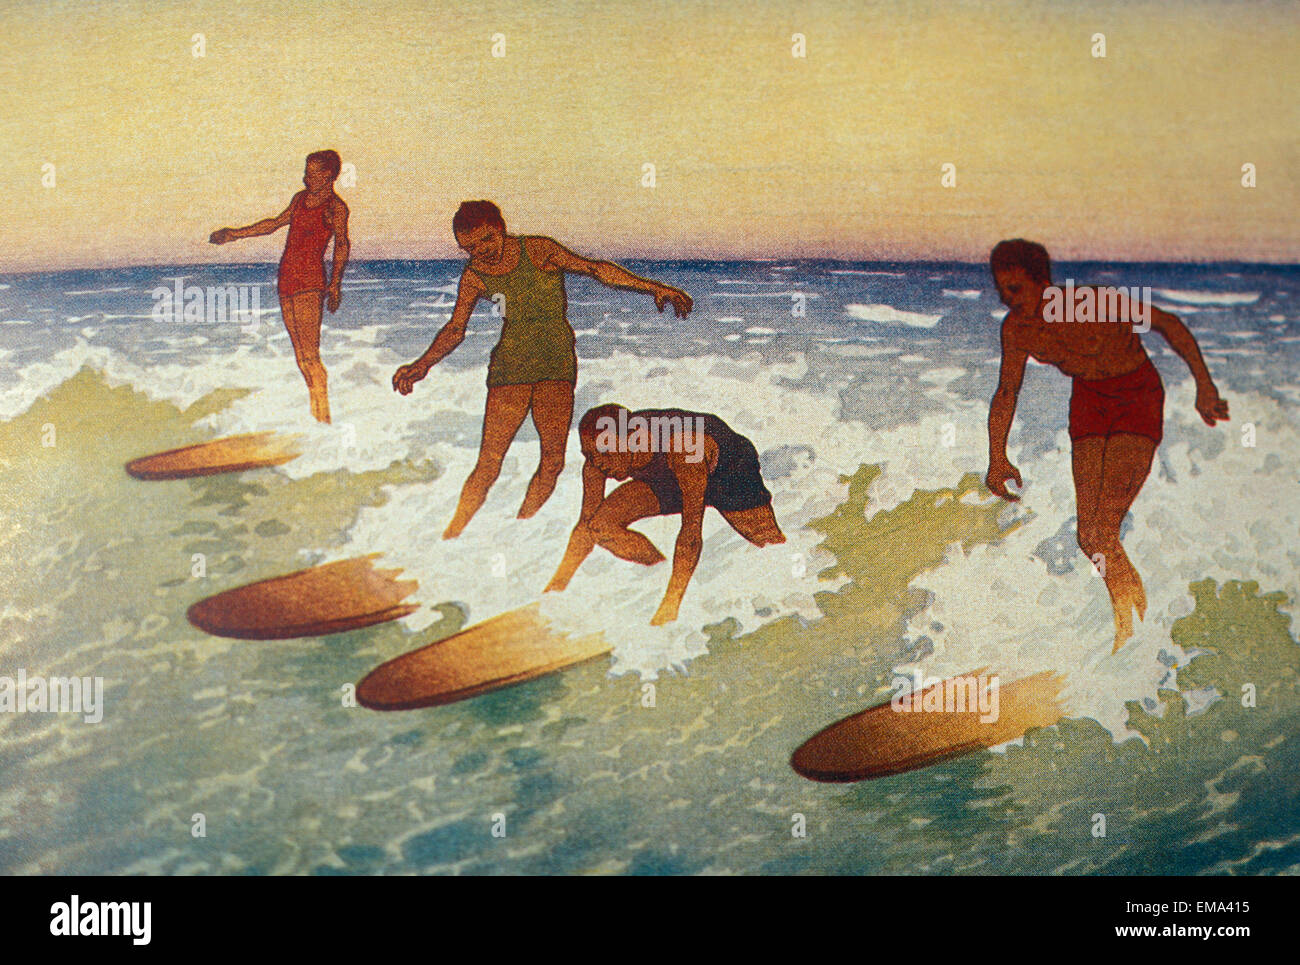 C.1927 Hawaii, Painting, Charles Bartlett, 4 Surfers Catching A Wave Stock Photo